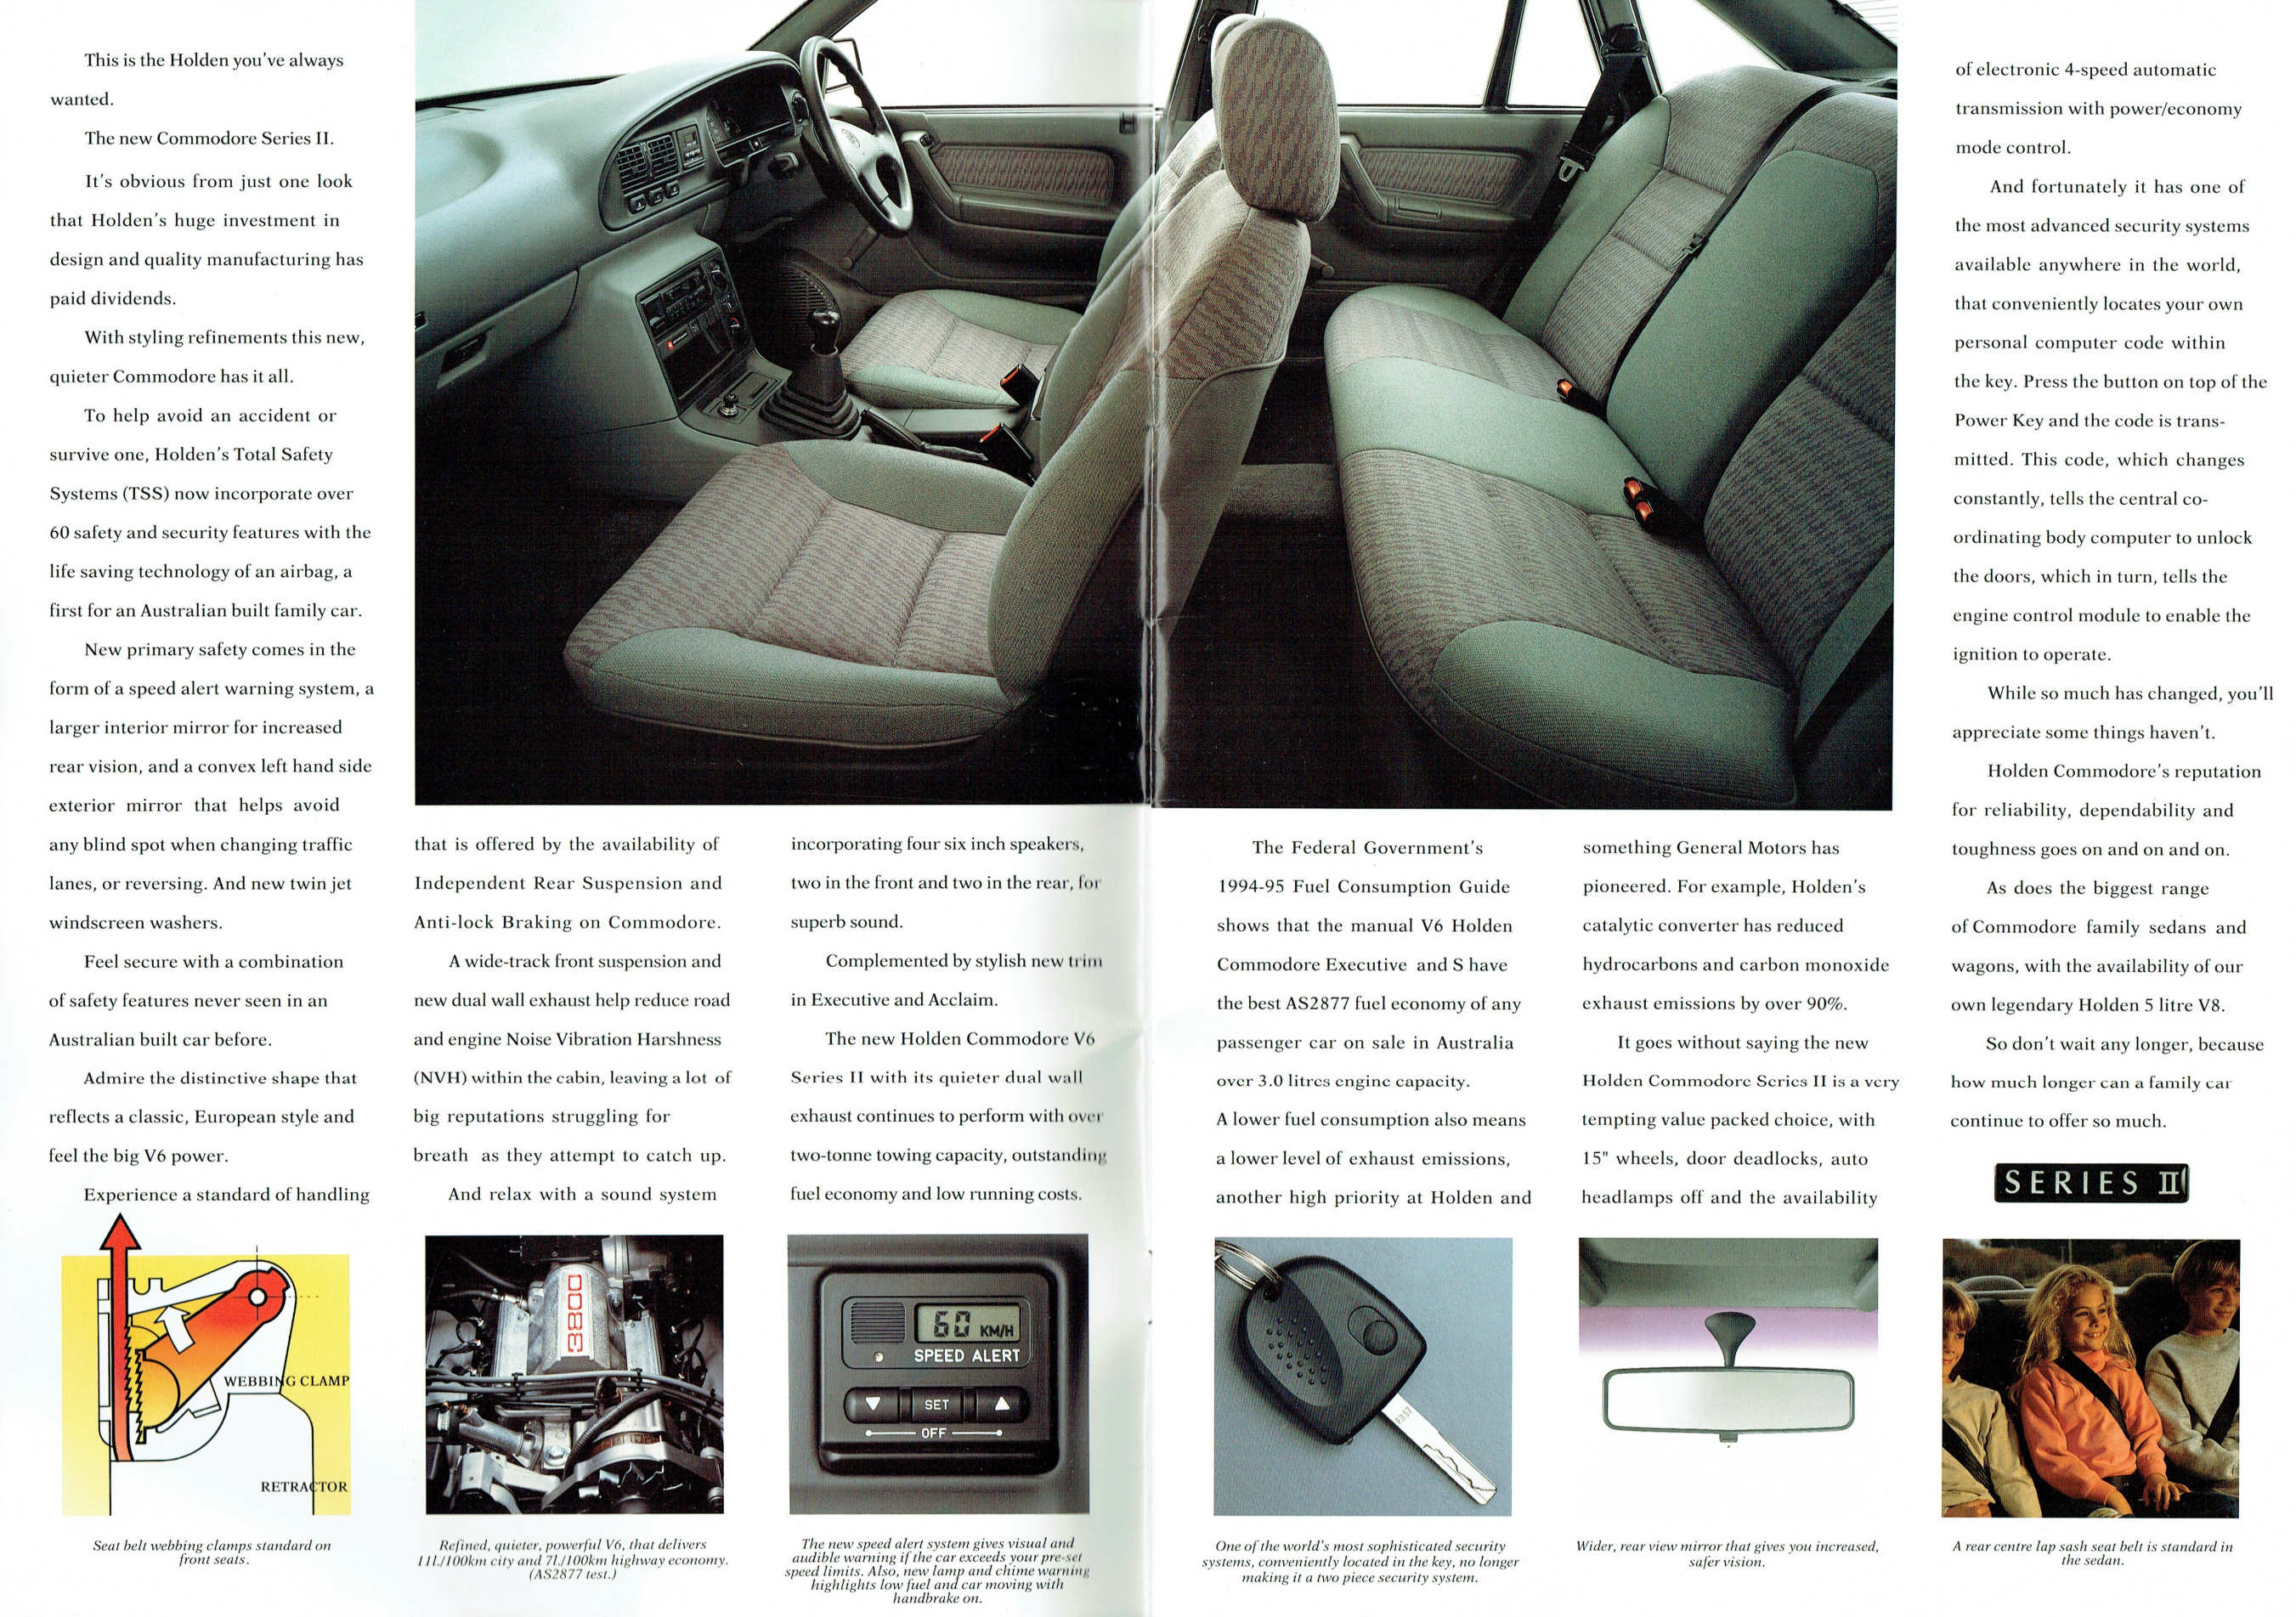 1994_Holden_VR_Series_II_Commodore-04-05